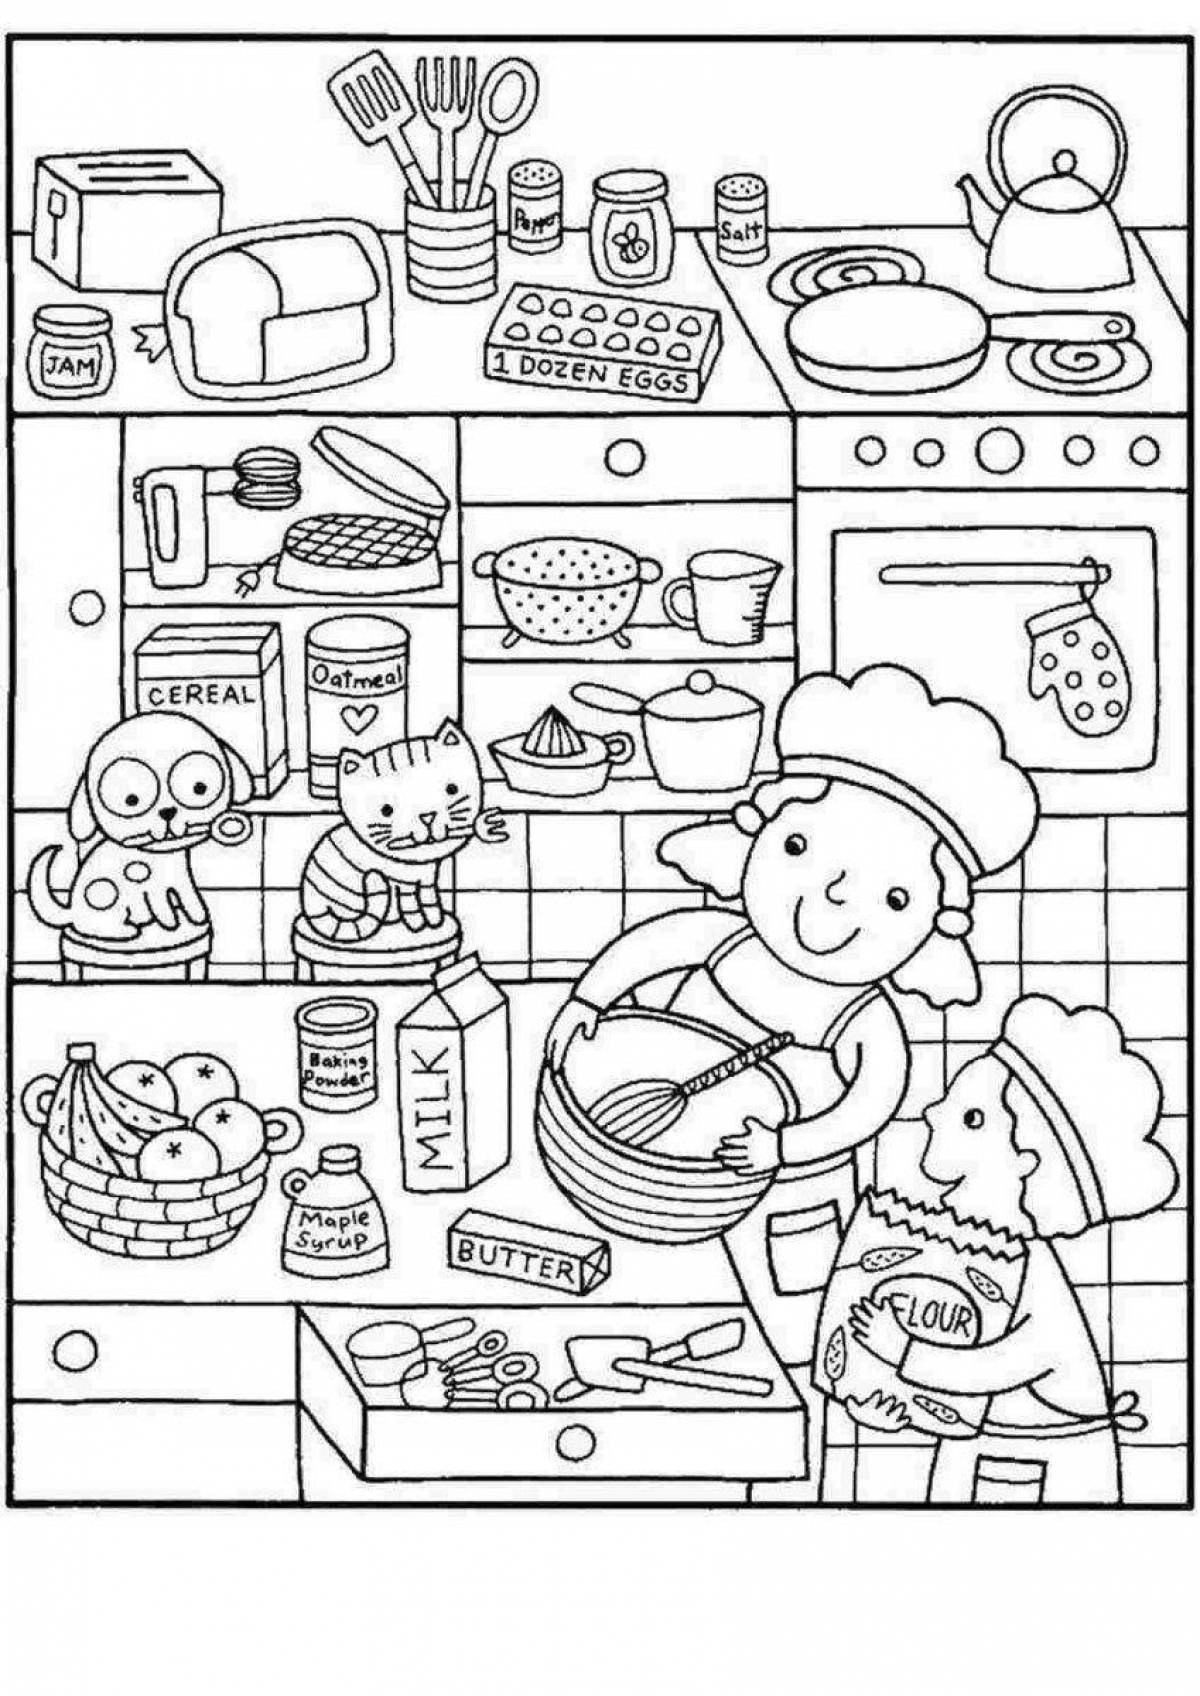 Coloring page amazing mayan cuisine